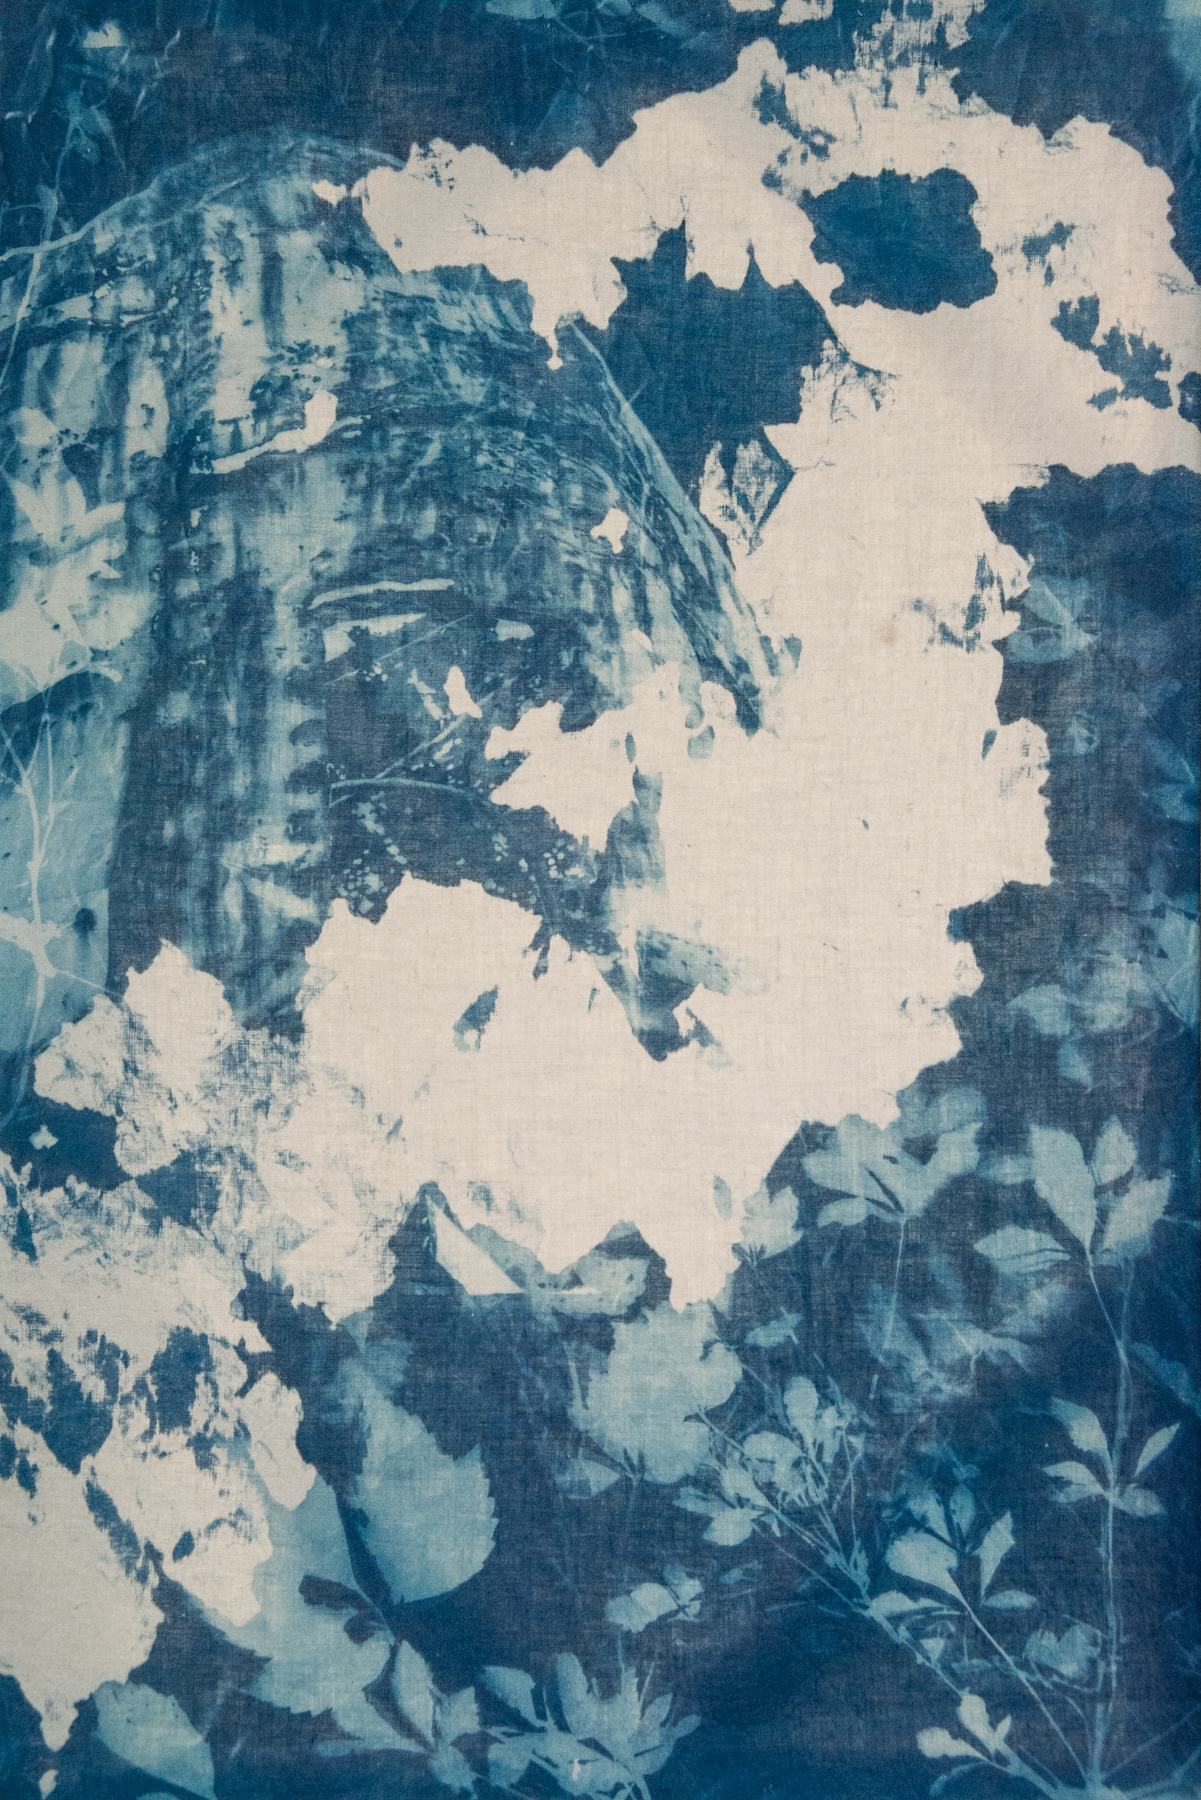  Marie Craig,  Crane 2,  cyanotype on linen stretched over canvas, 36x24 